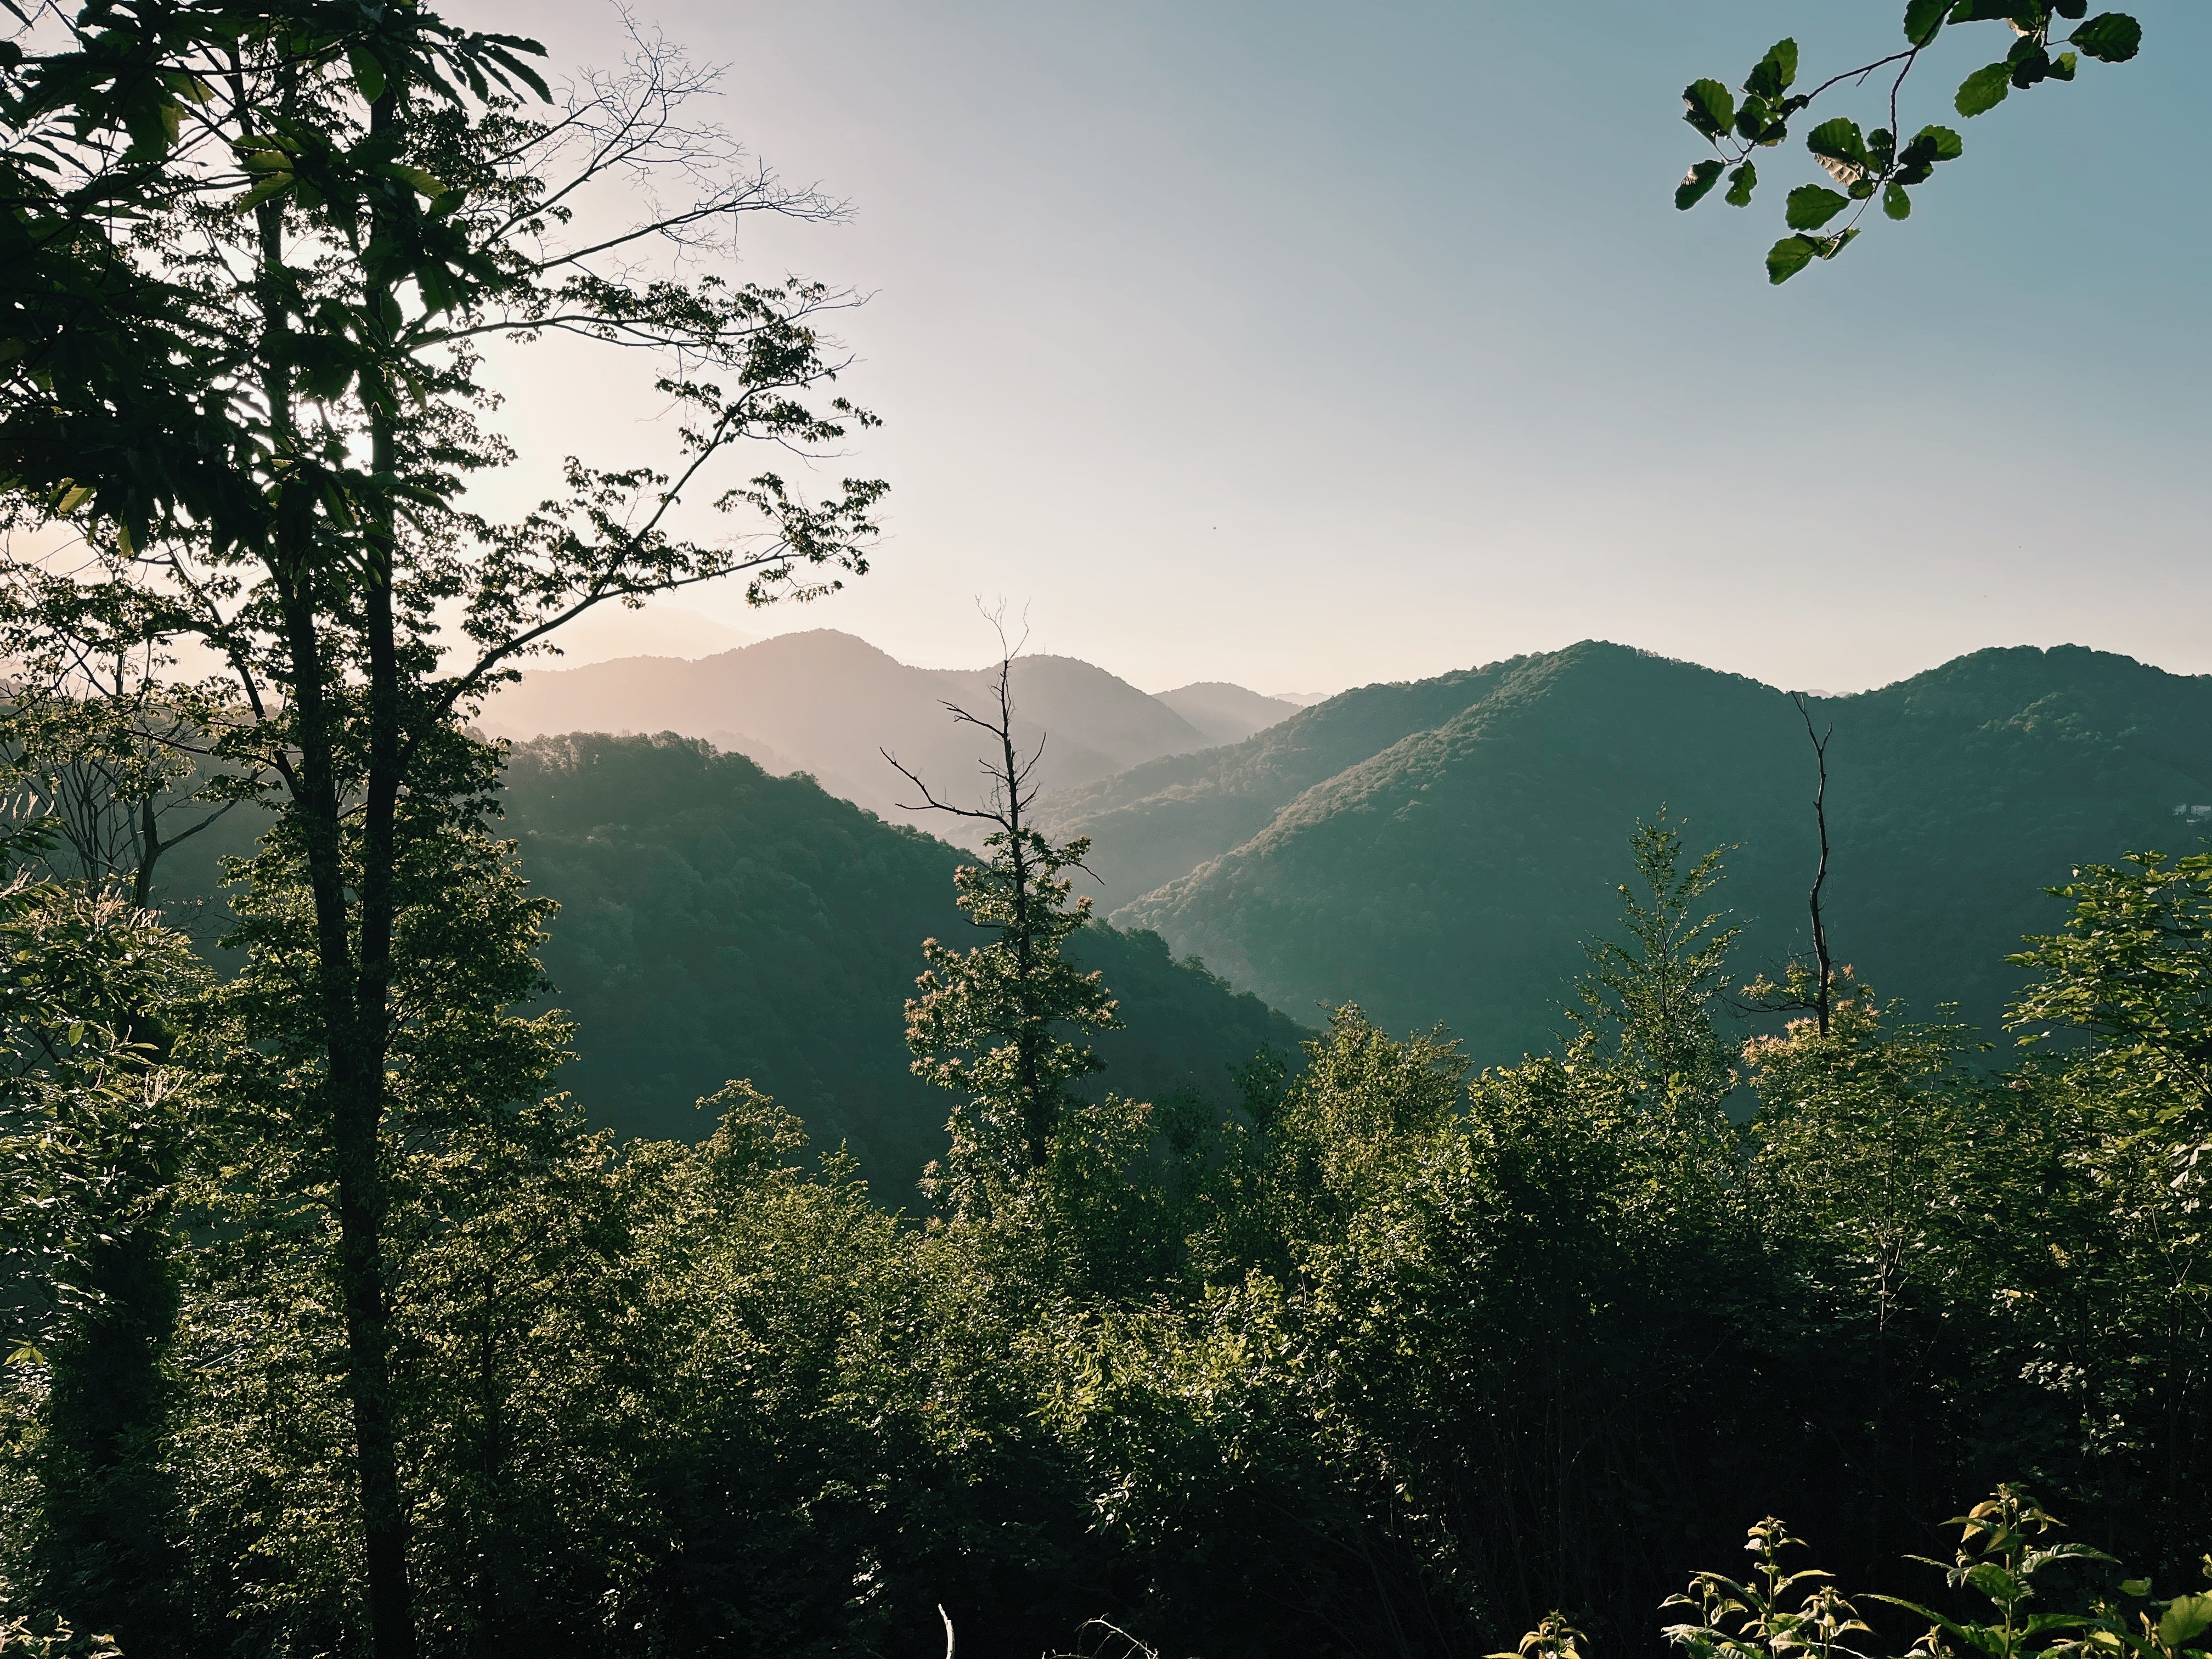 Sunrise over a forest and mountain range in Italy while Hiking the Alpe Adria Trail